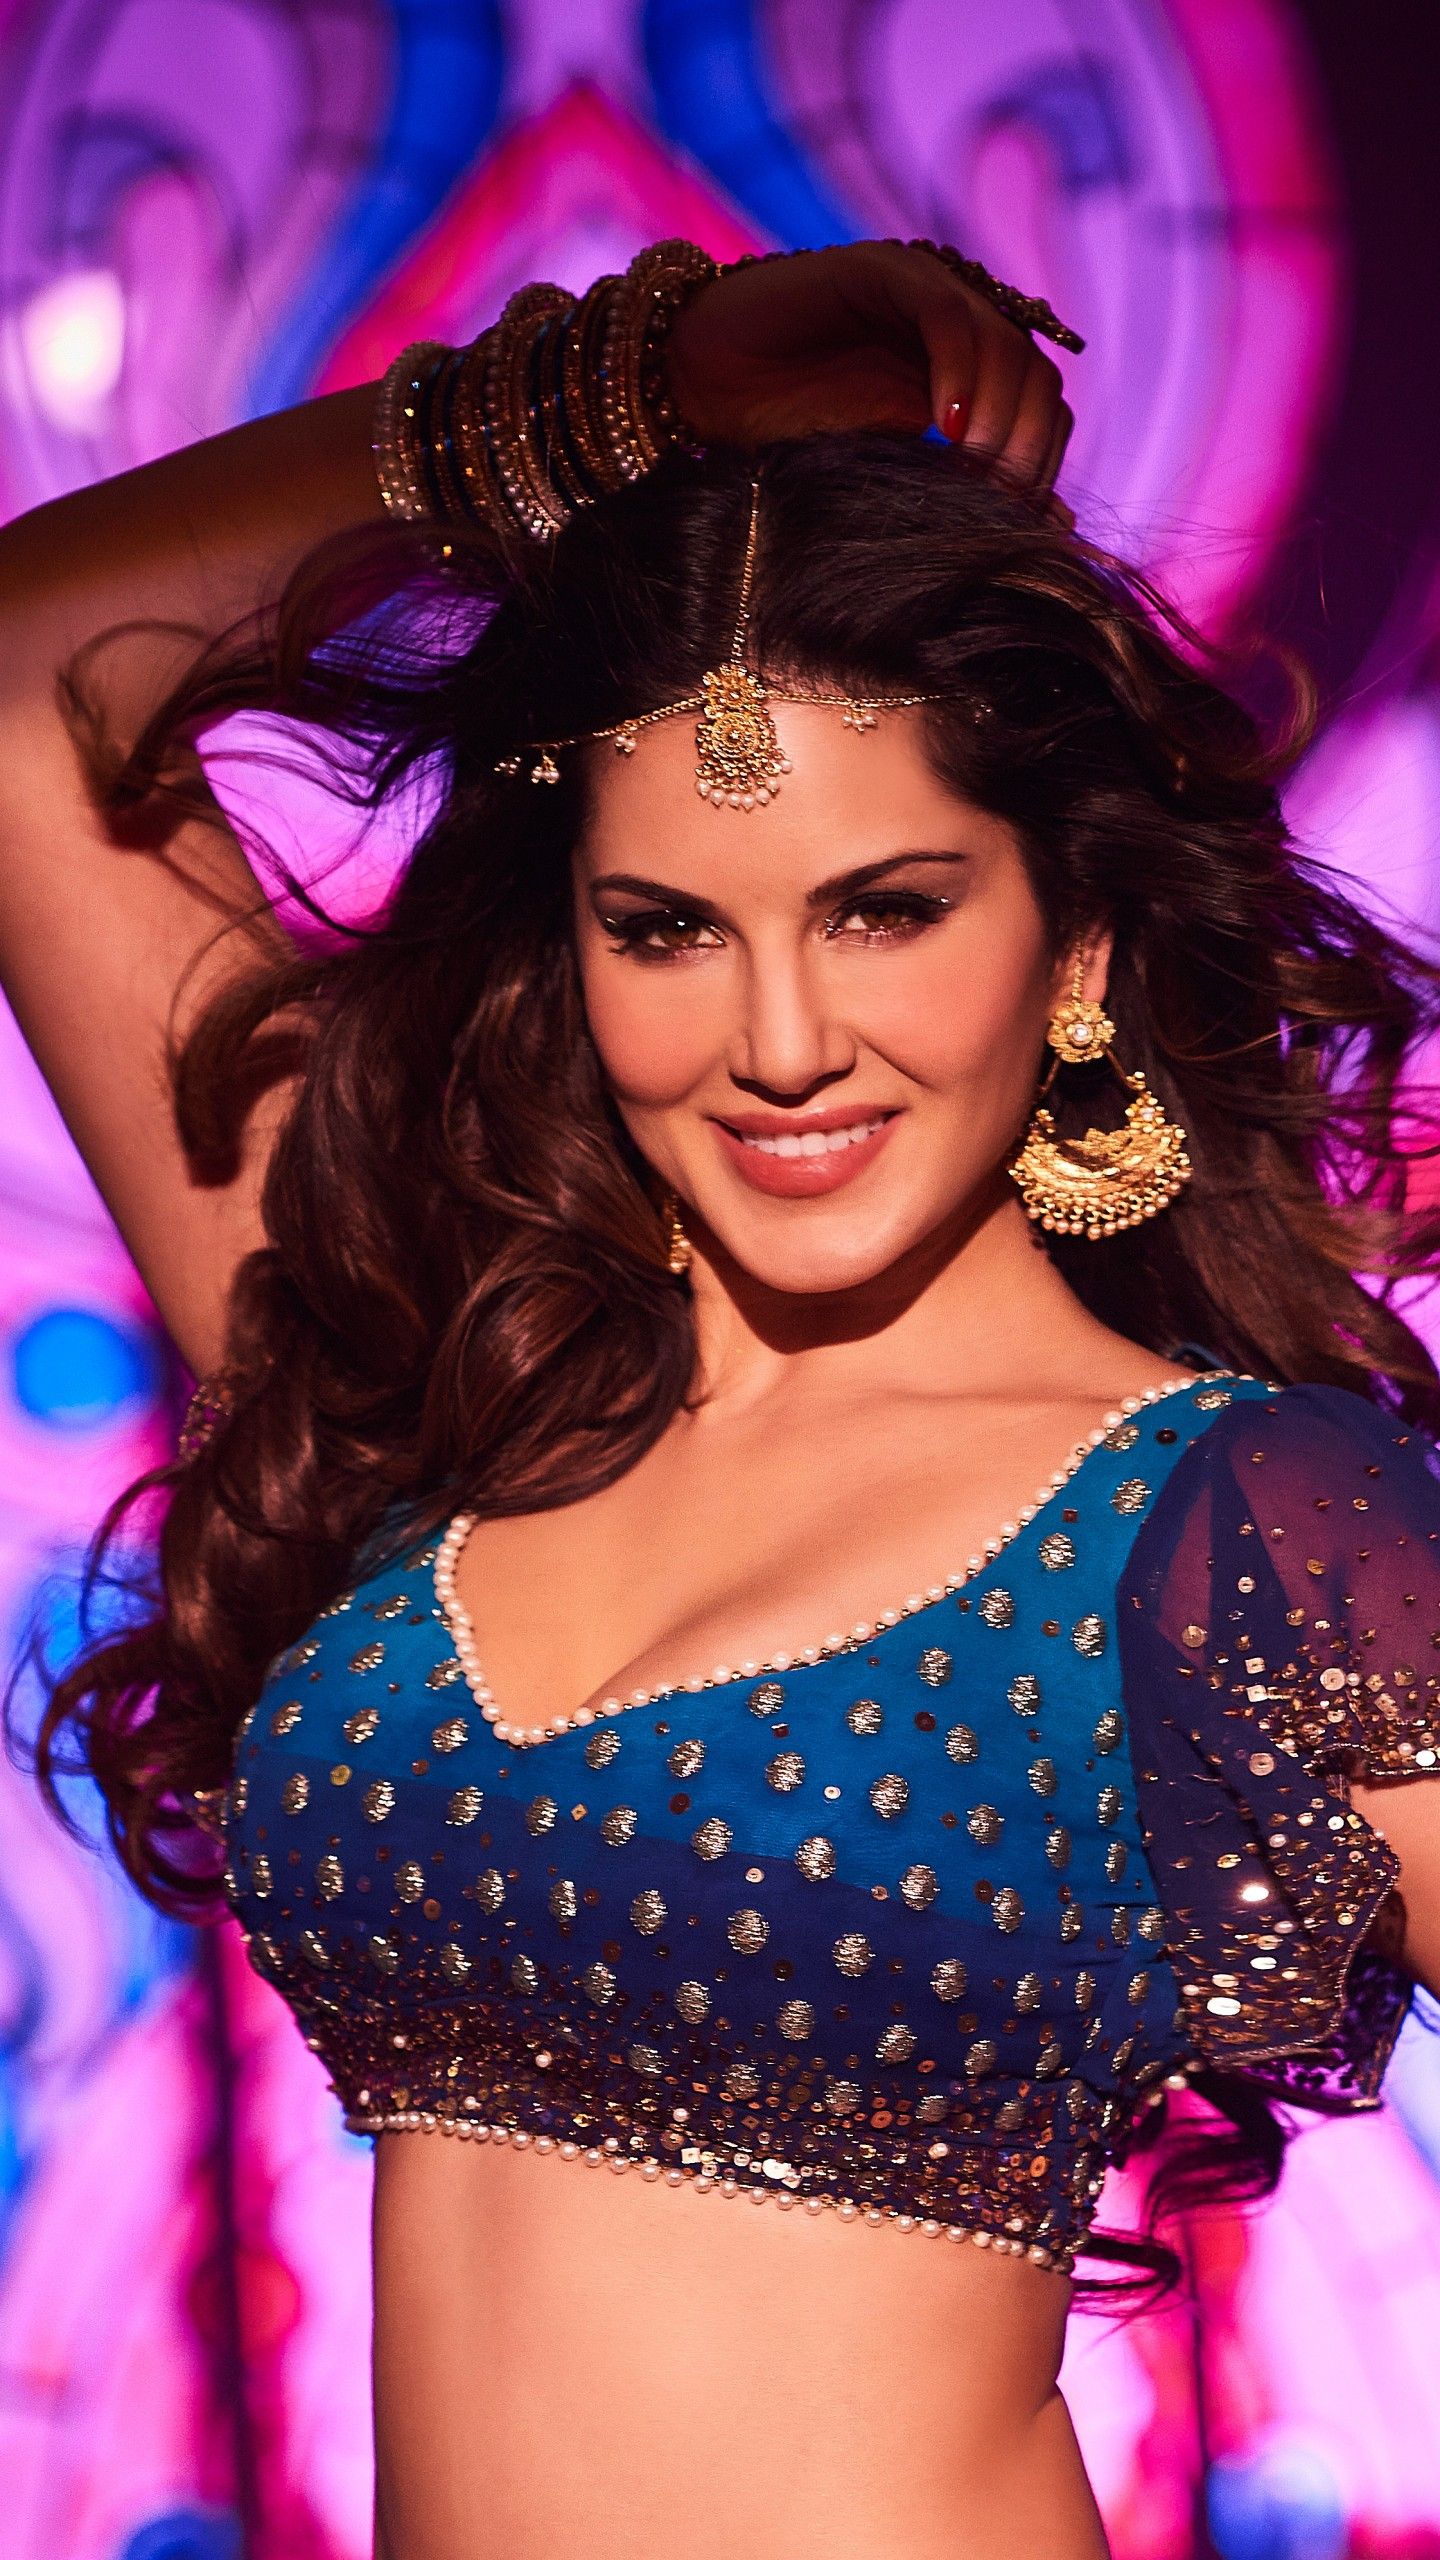 Sunny Leone iPhone Wallpapers - Wallpaper Cave